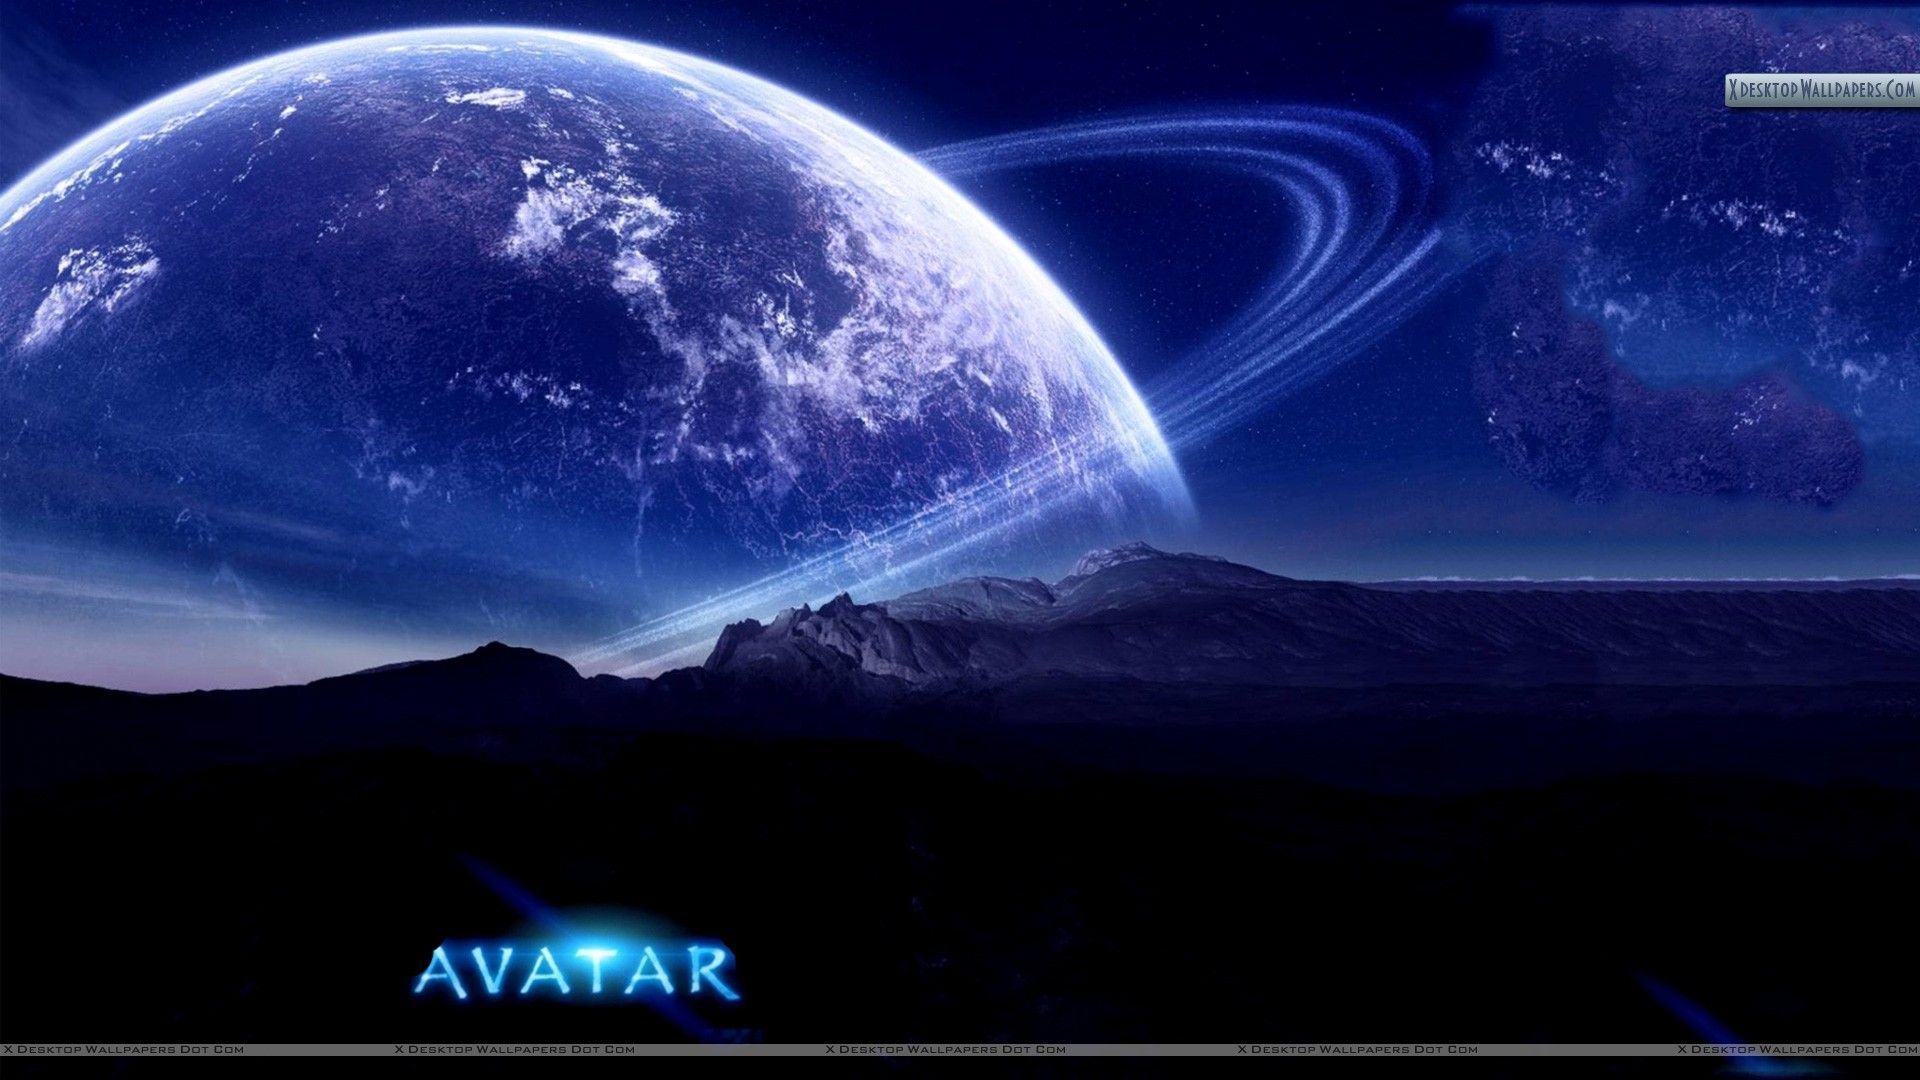 Avatar Wallpapers, Photos & Images in HD